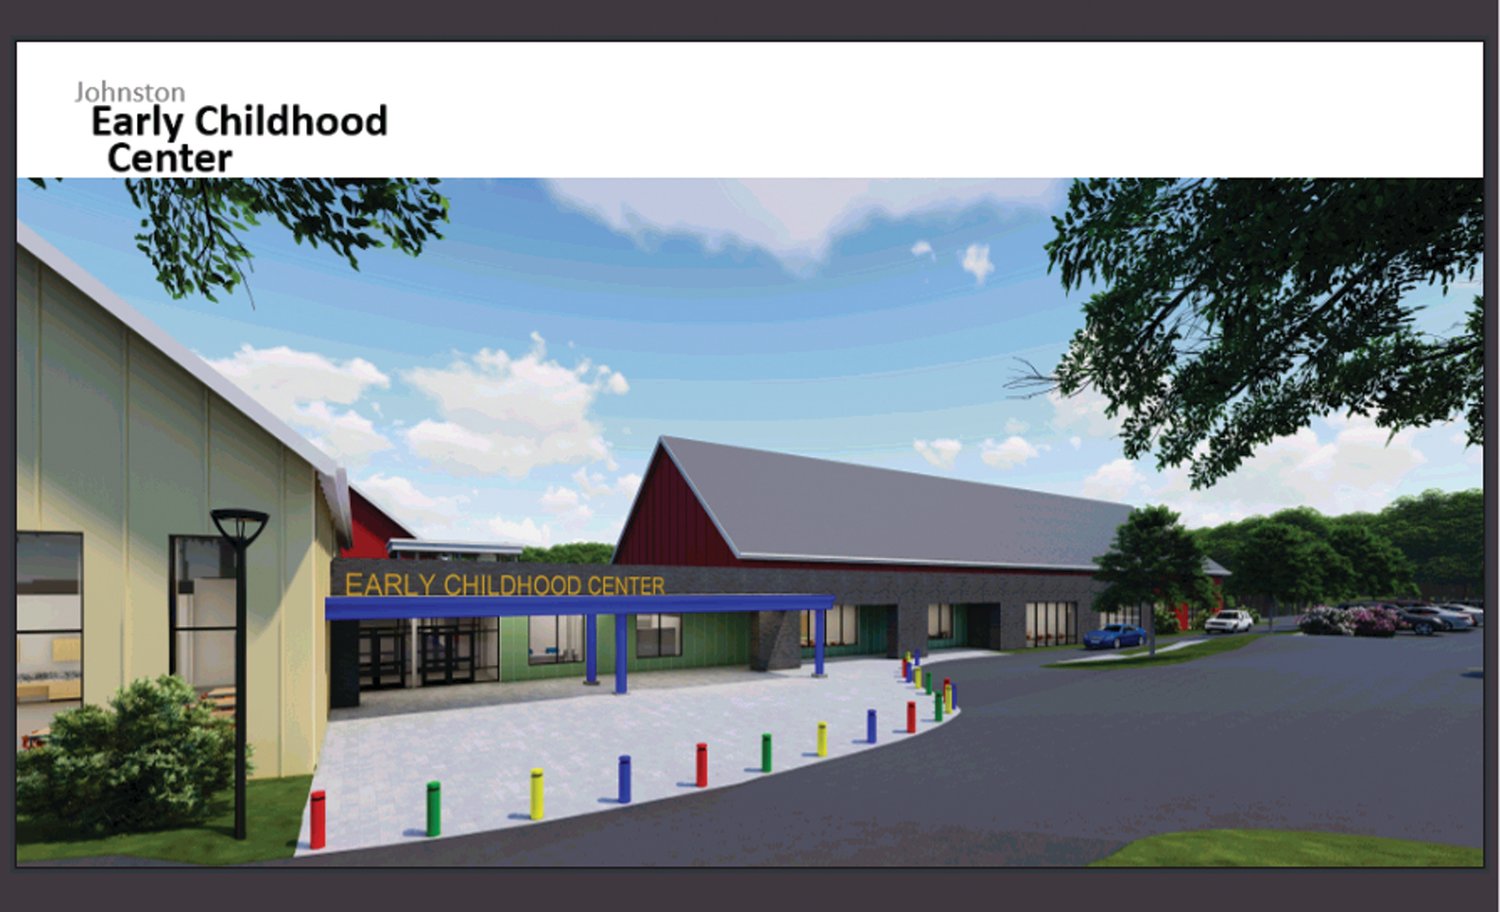 ECC: Johnston plans to build a new Early Childhood Center. The new Johnston Early Childhood Center (ECC) may be built on the current site of the Sarah E. Barnes Elementary School, for approximately 359 pre-K through Kindergarten students.